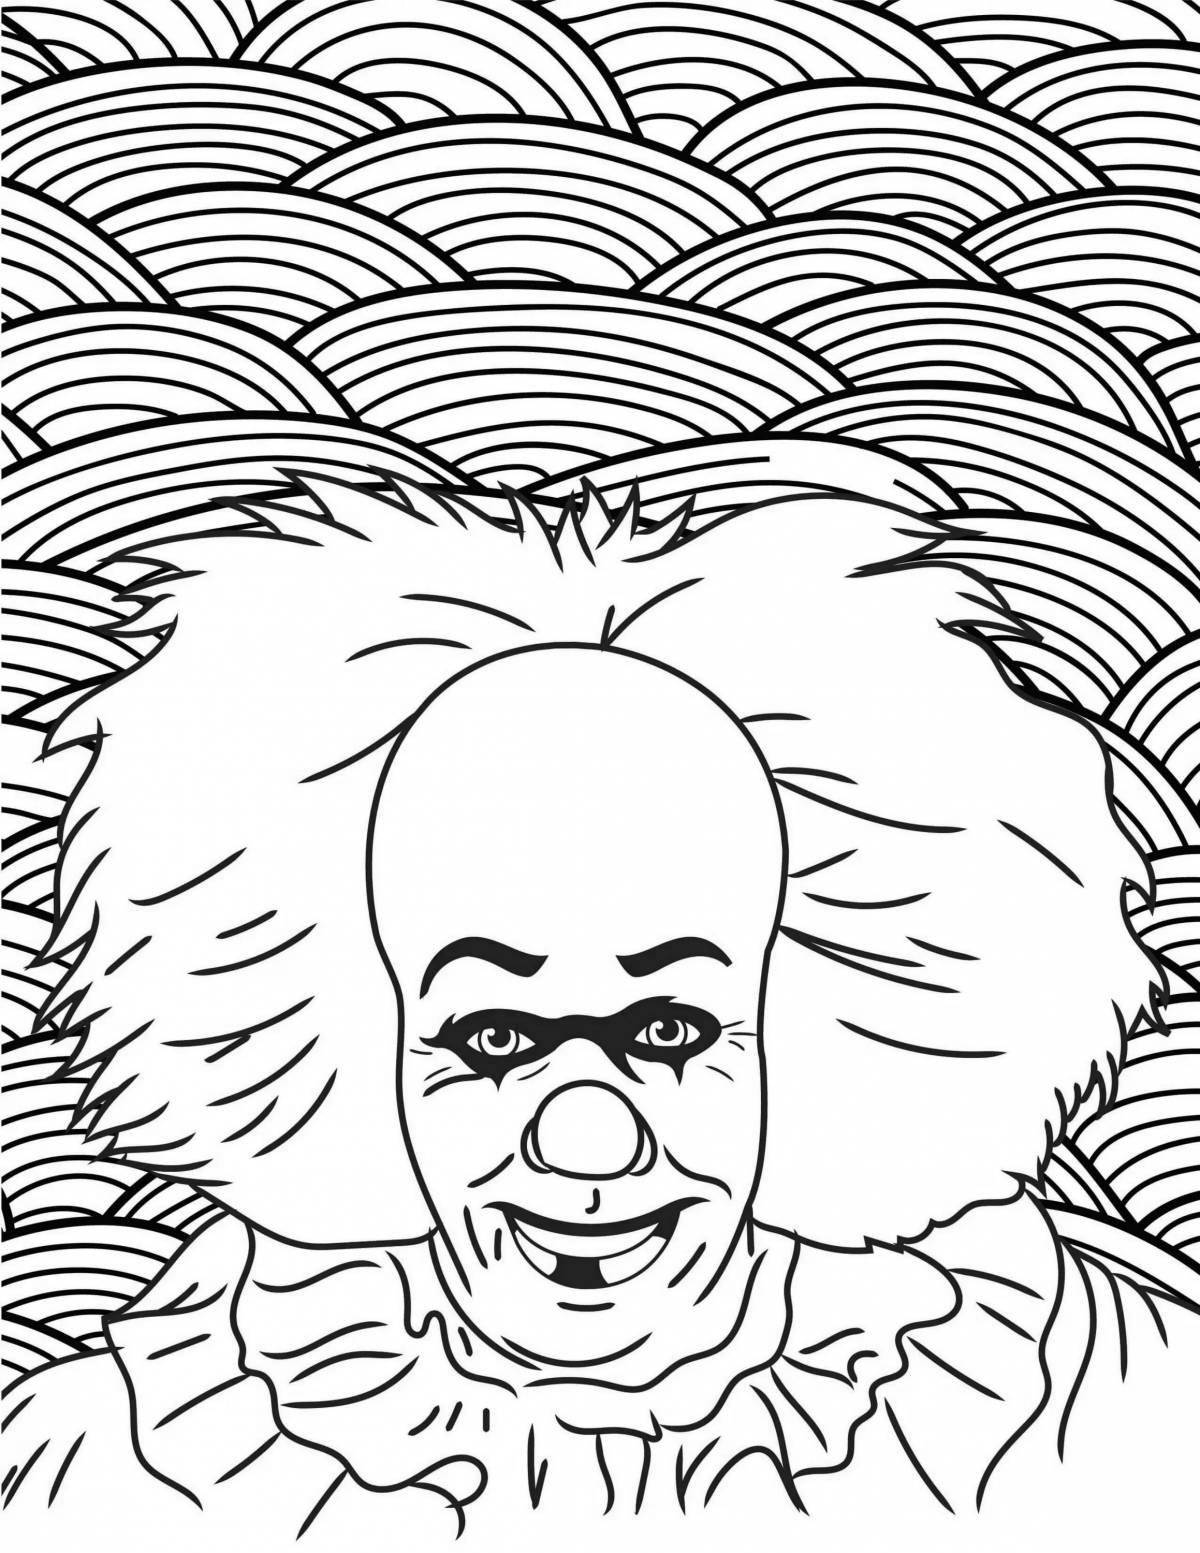 Scary and creepy horror coloring book